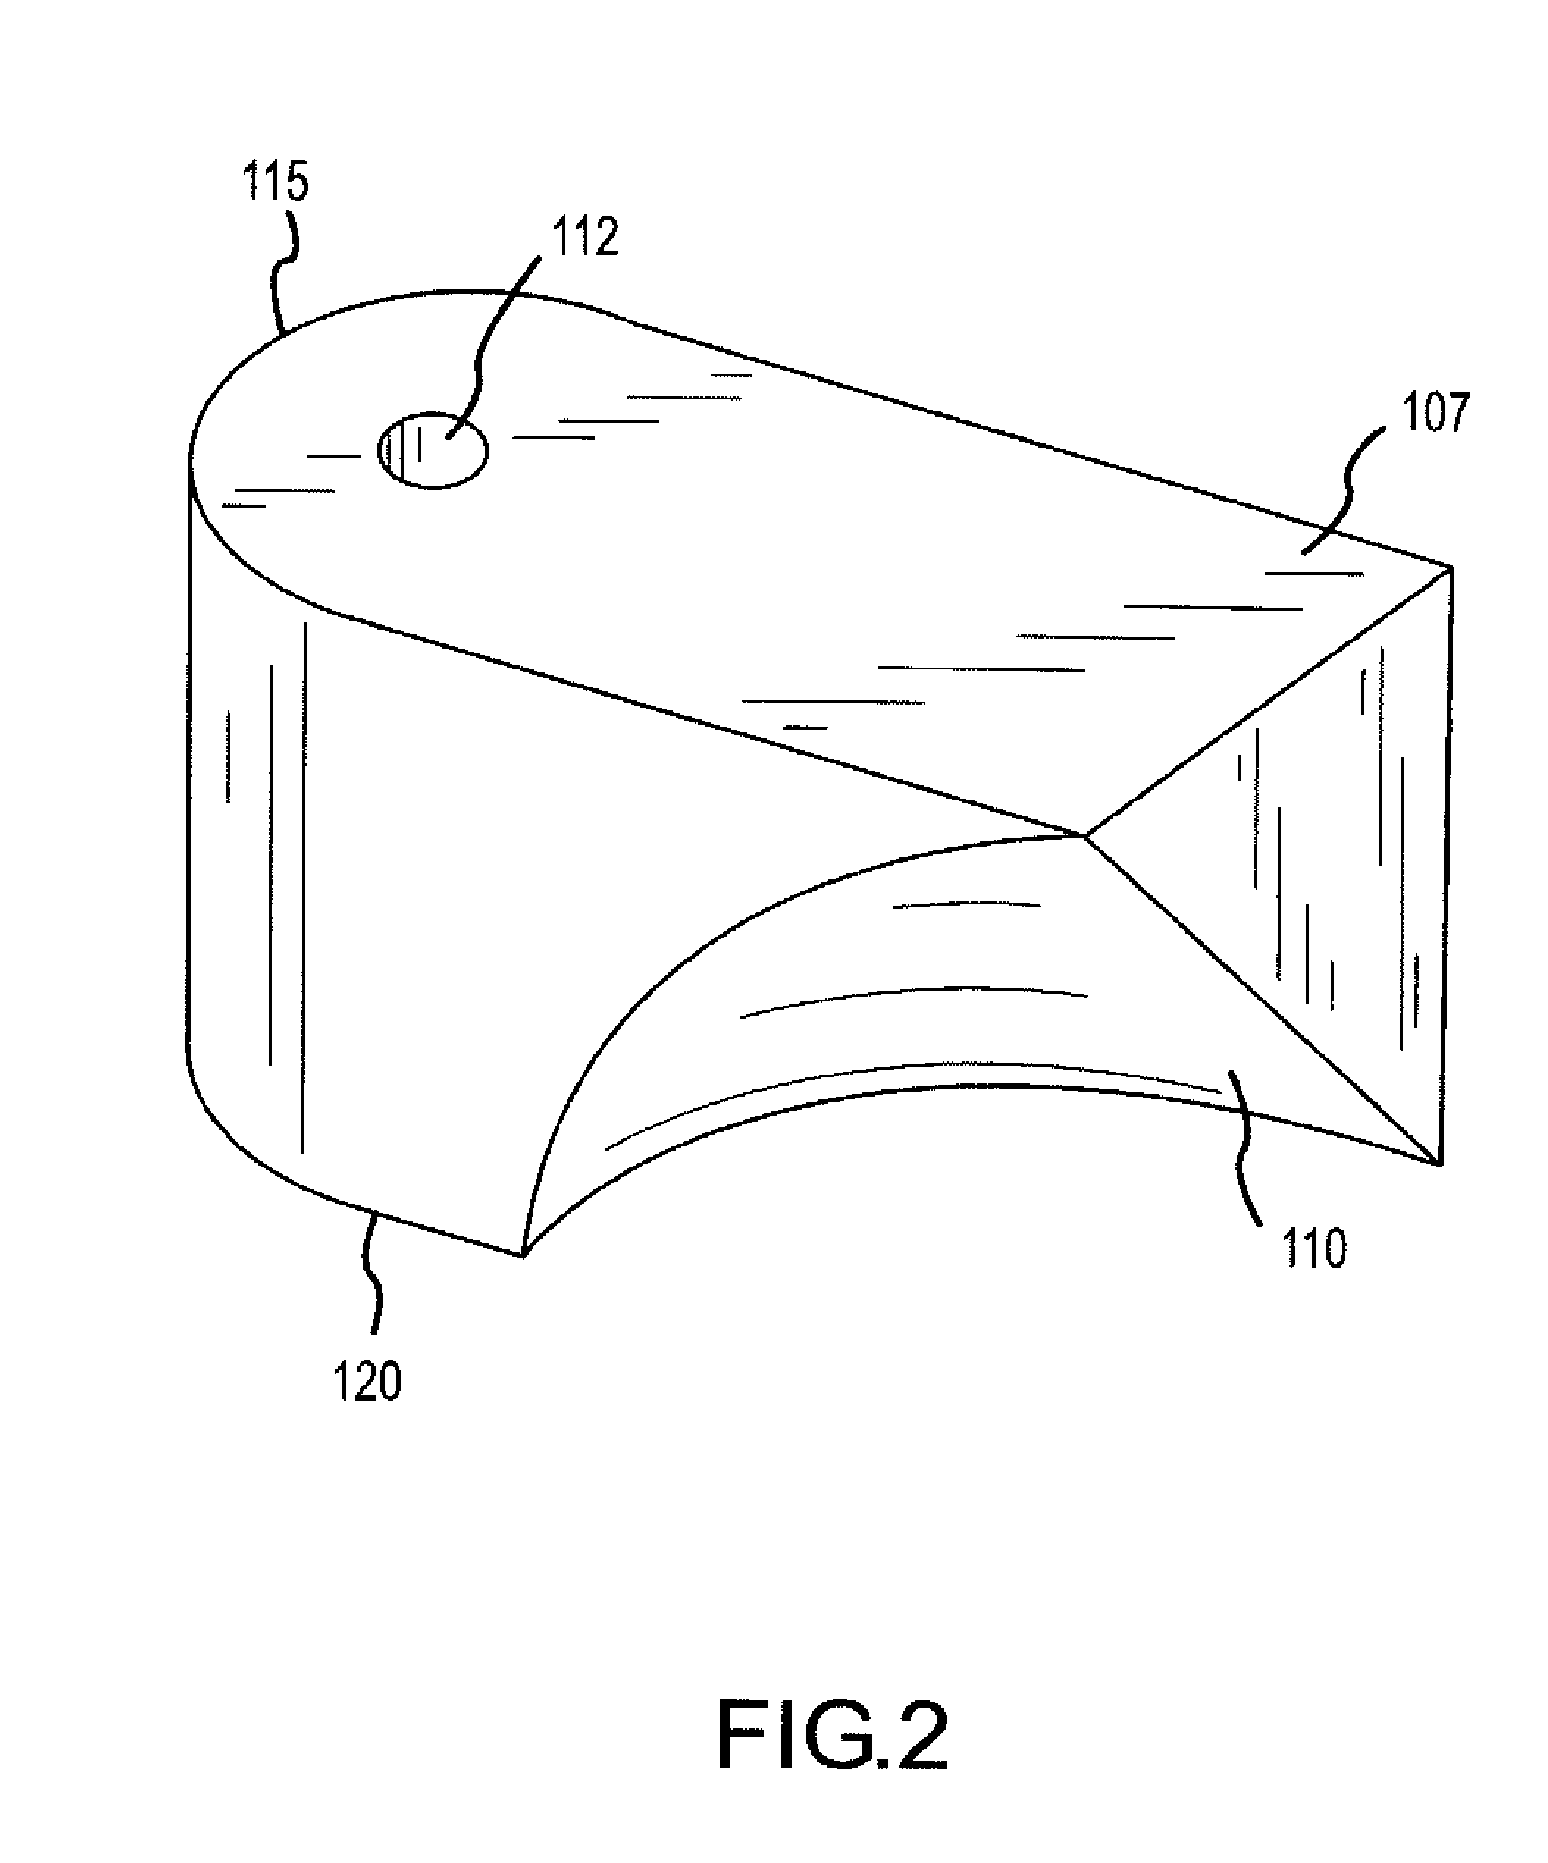 Exhaust assembly for mass ejection drive system